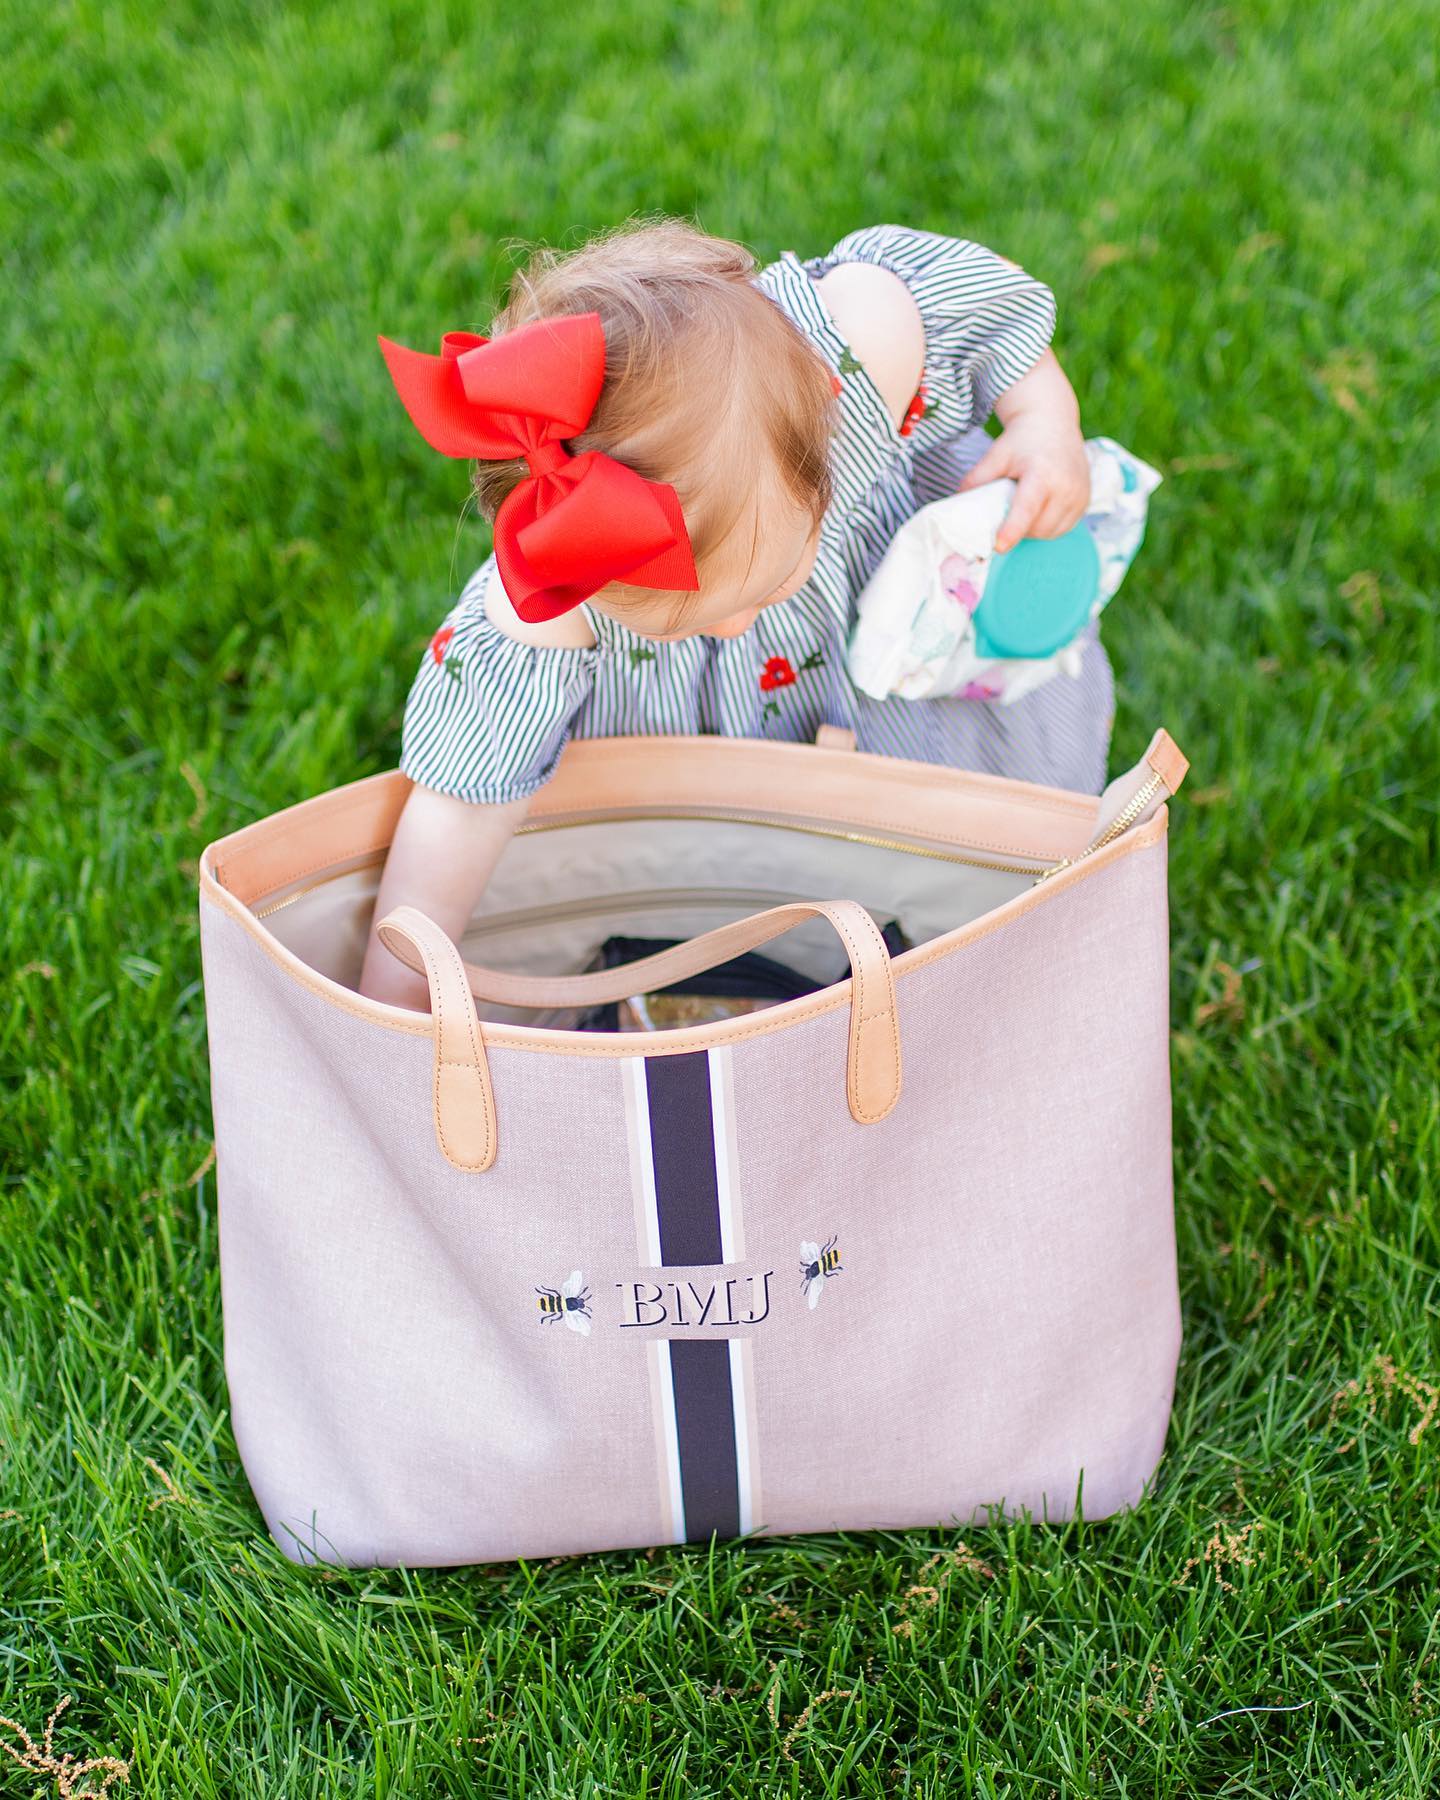 Stylish mom with a monogram diaper bag, the perfect accessory for modern parenting